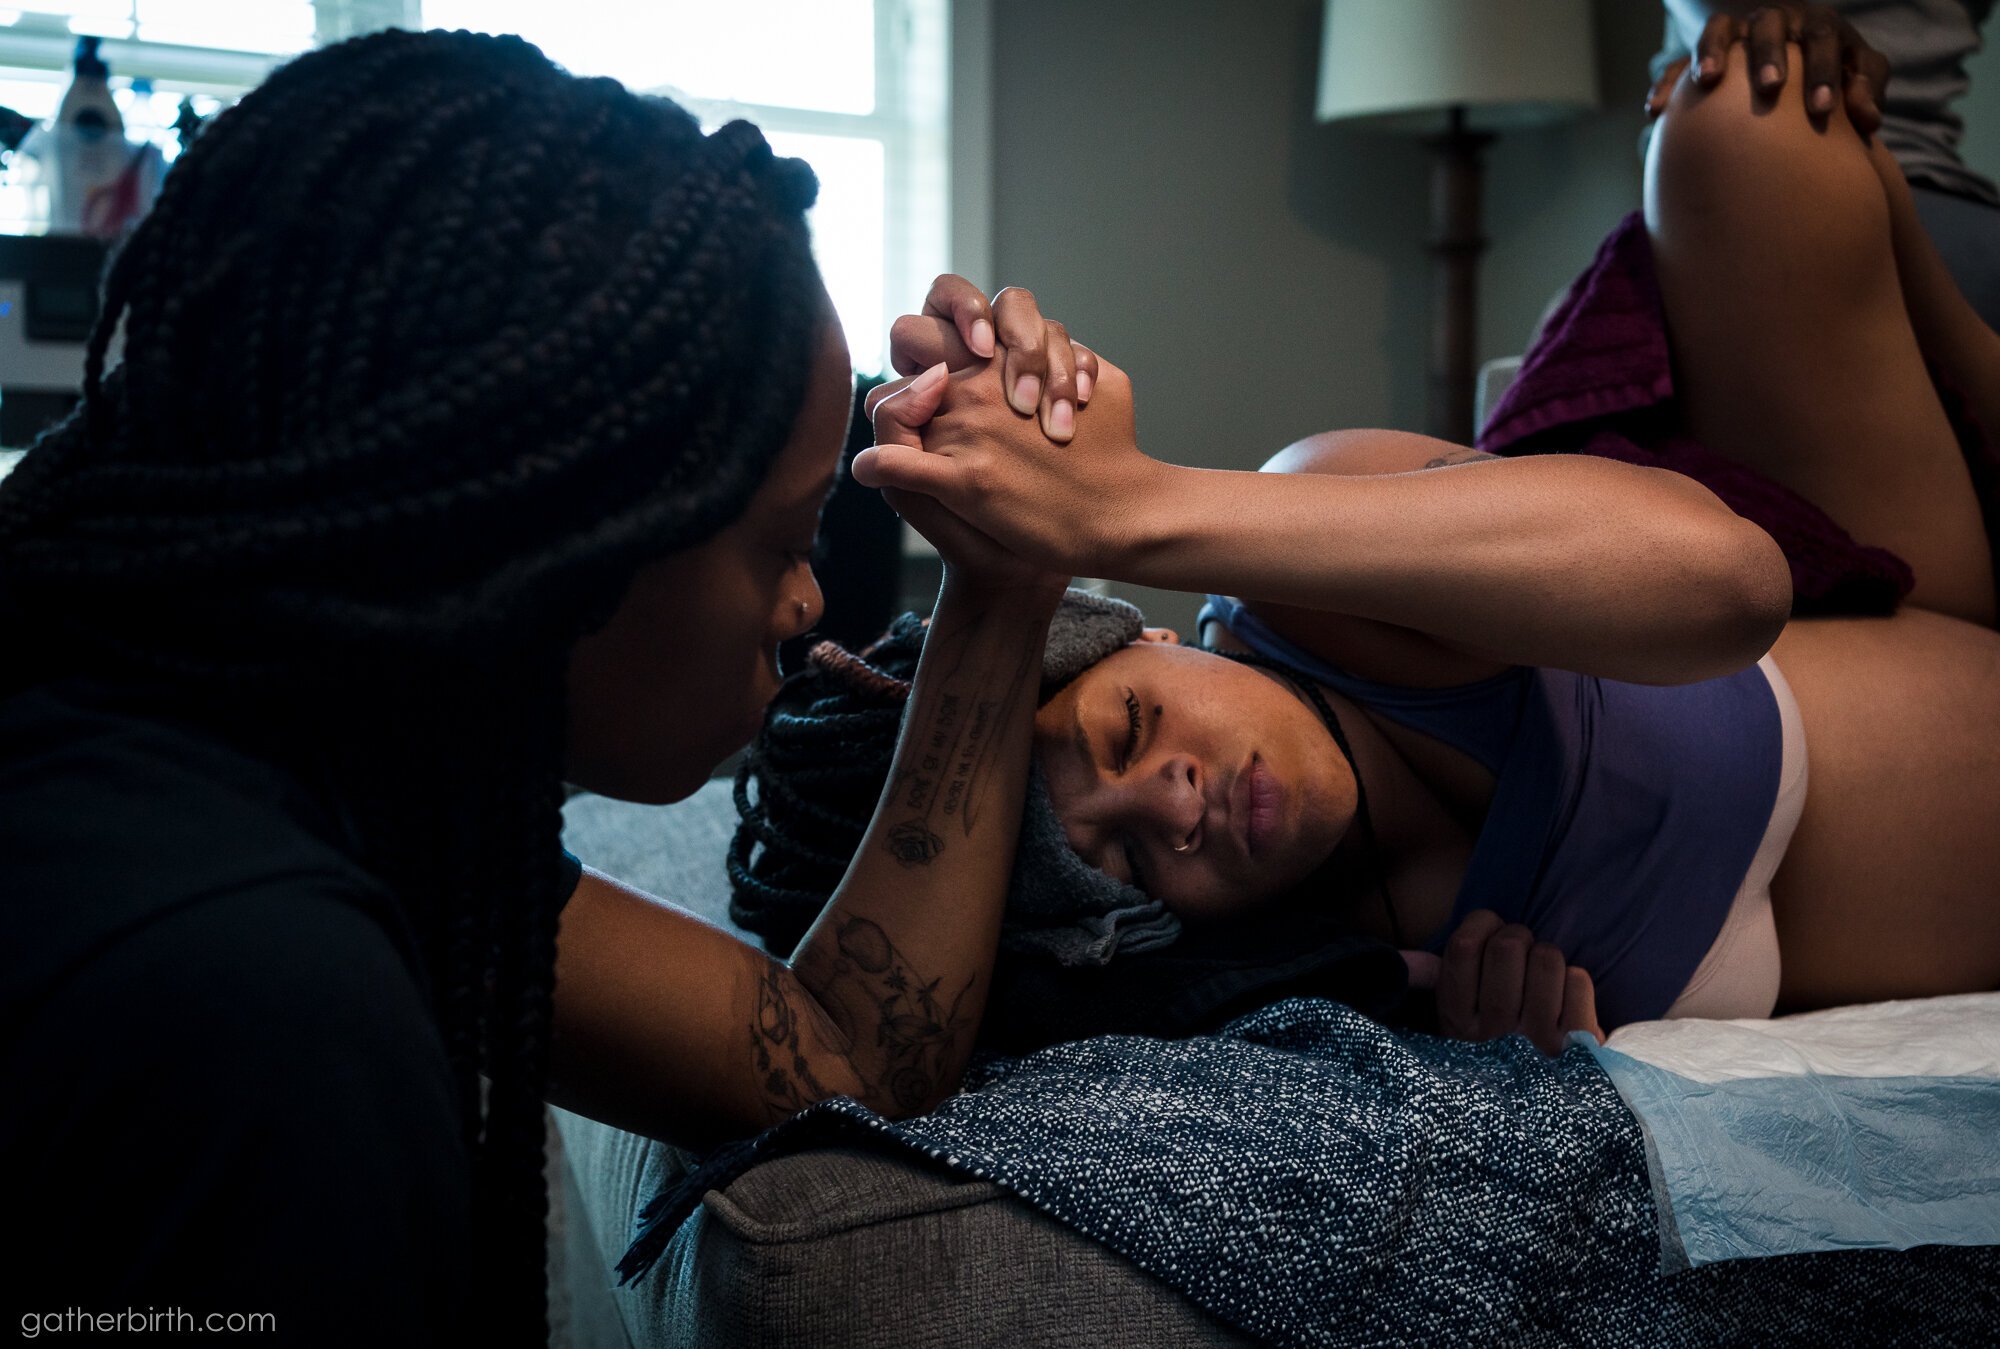 Gather+Birth+Cooperative-+Doula+Support+and+Birth+Photography+in+Minneapolis+-+July+10,+2021+-+185113.jpg